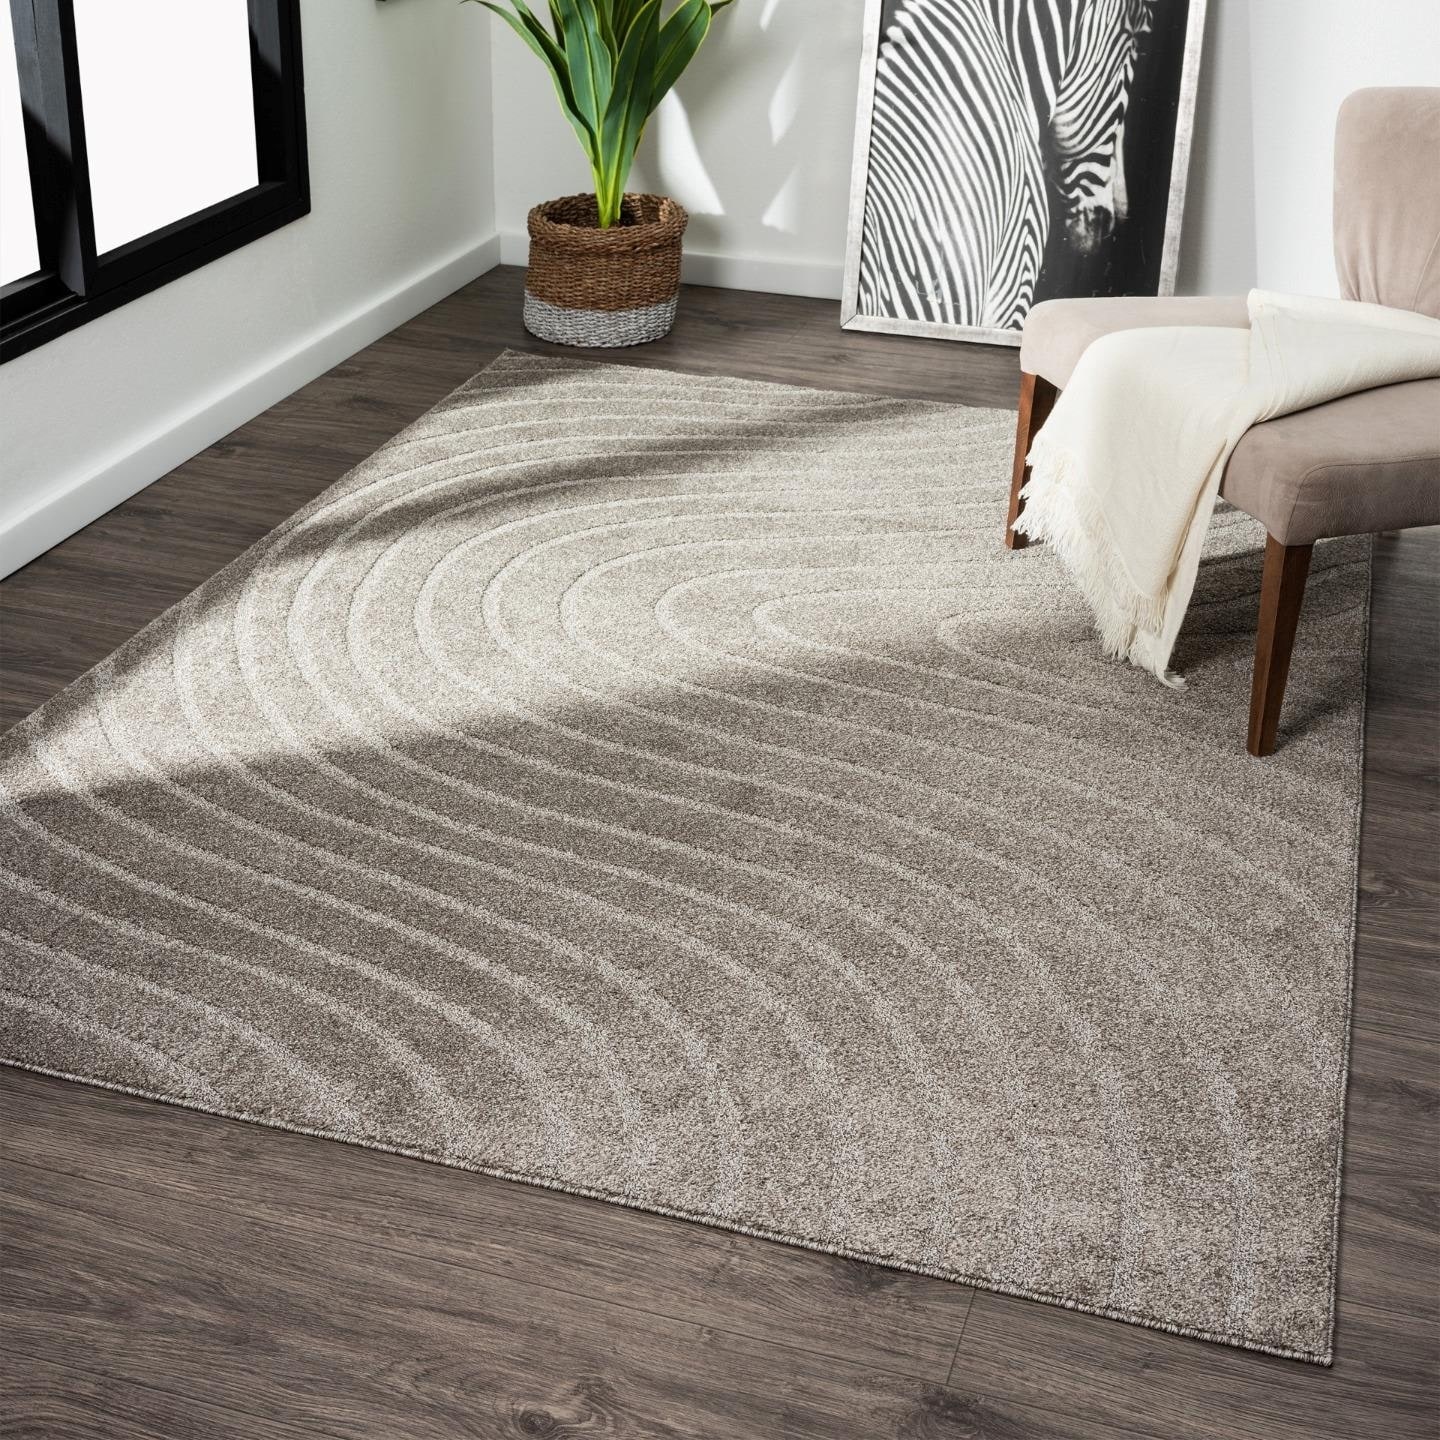 https://ak1.ostkcdn.com/images/products/is/images/direct/ce10620291608d37cac129d28188260ae261cdf4/Luxe-Weavers-Modern-Geometric-Wave-Area-Rug%2C-Stain-Resistant-Carpet.jpg